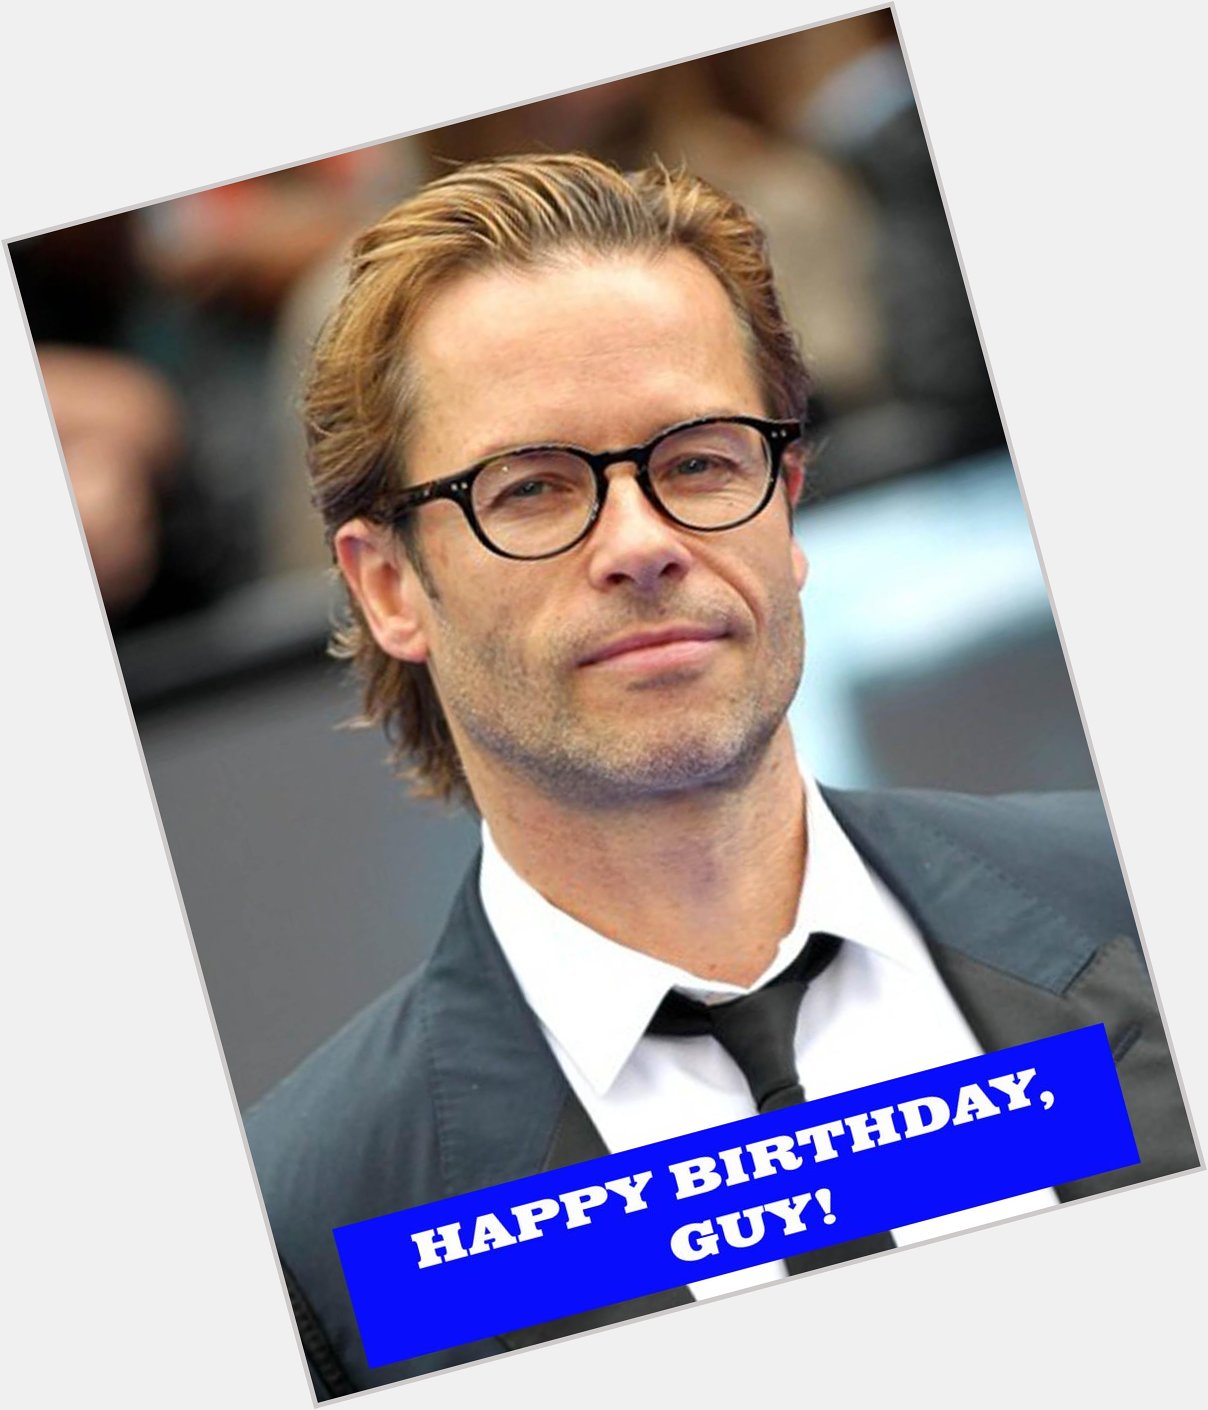 Wishing a Happy Birthday to Guy Pearce. Ever since \L.A. Confidential its been one great performance after another. 